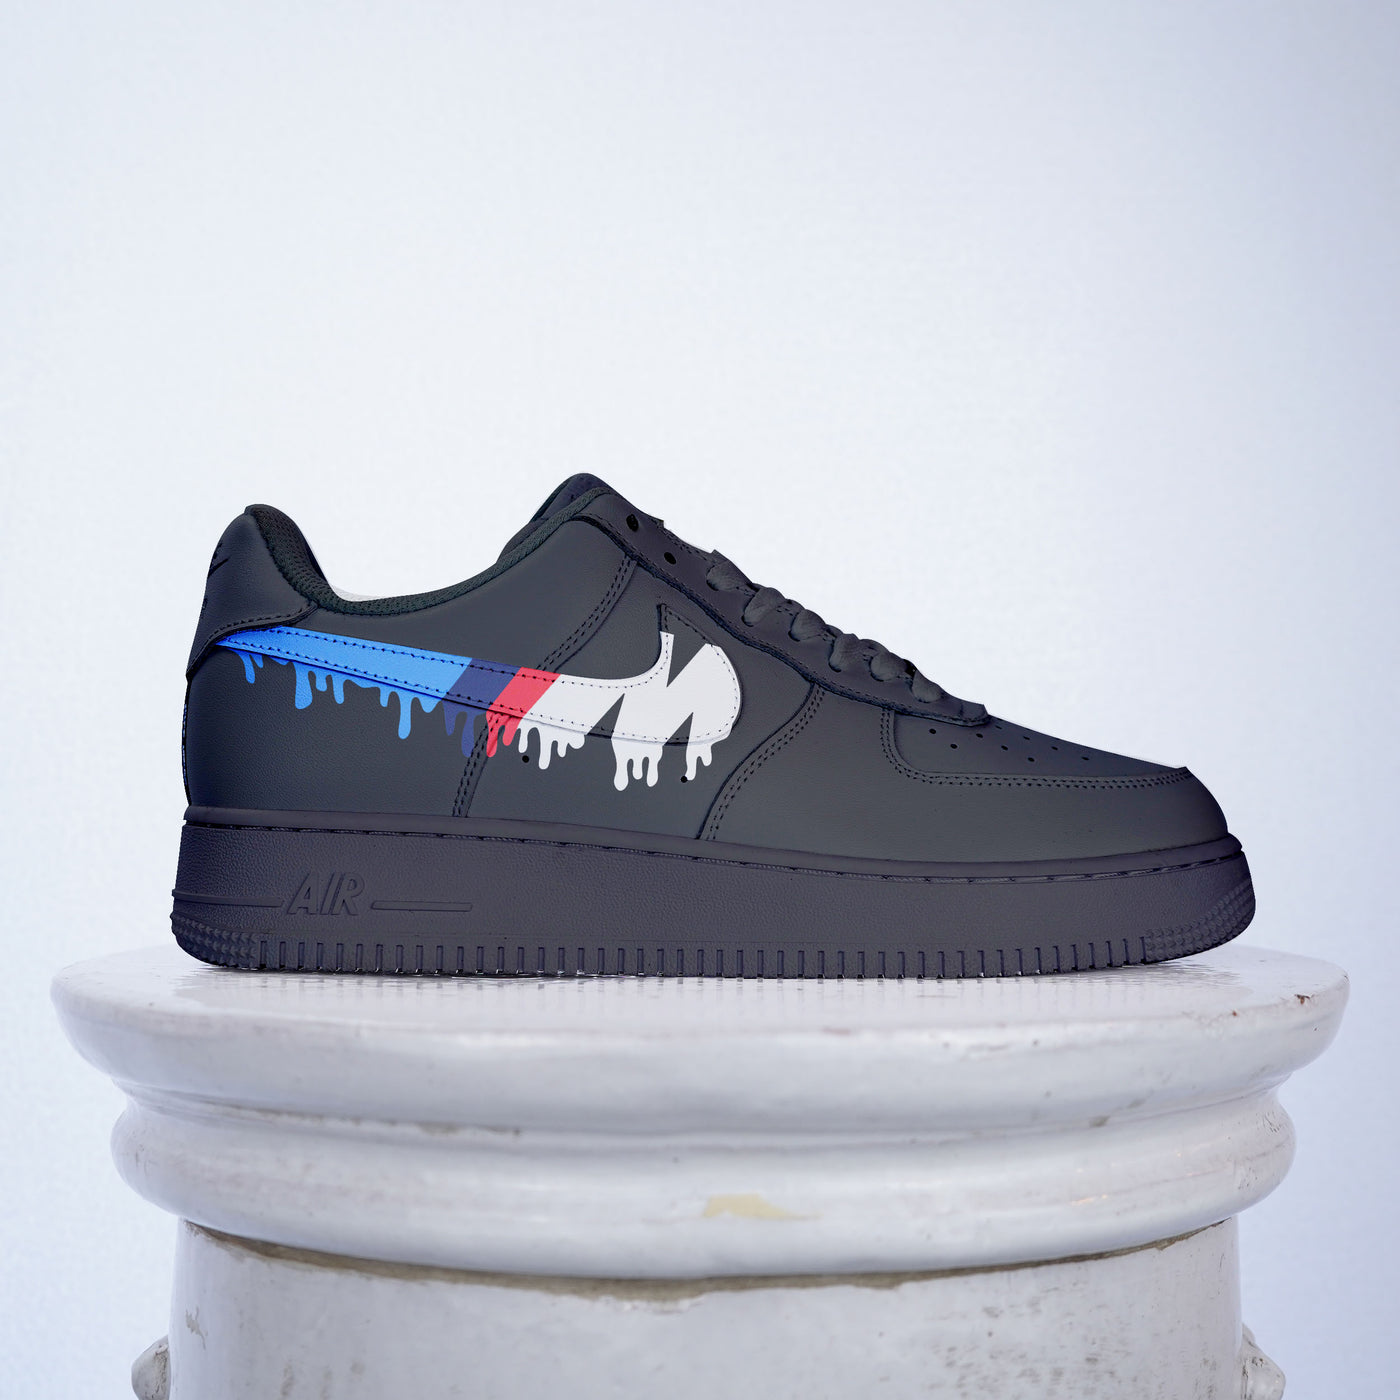 BMW Sneaker (Limited Edition)